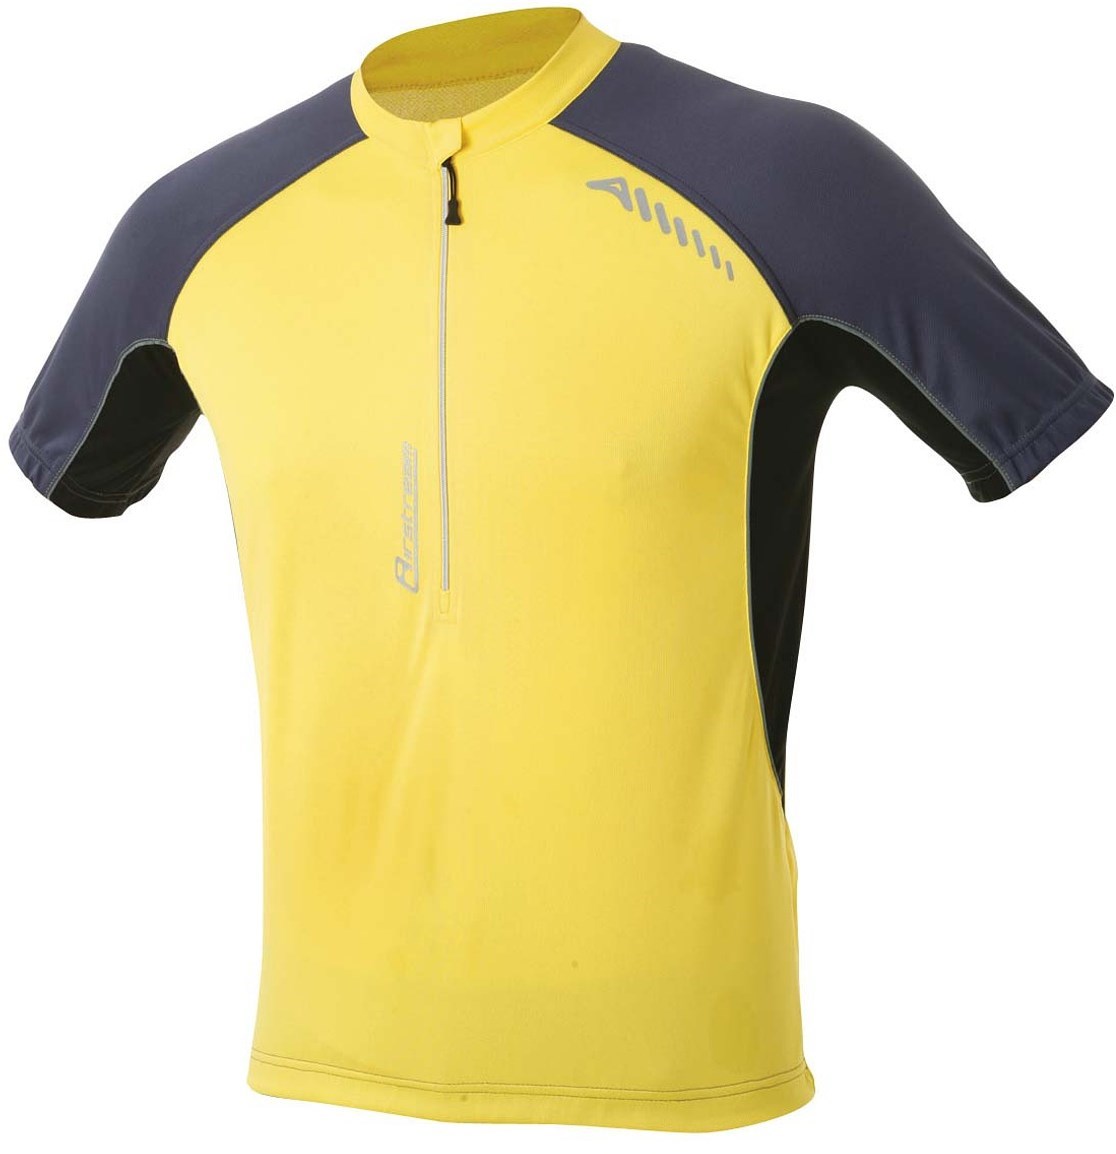 Altura Airstream Short Sleeve Cycling Jersey 2013 product image